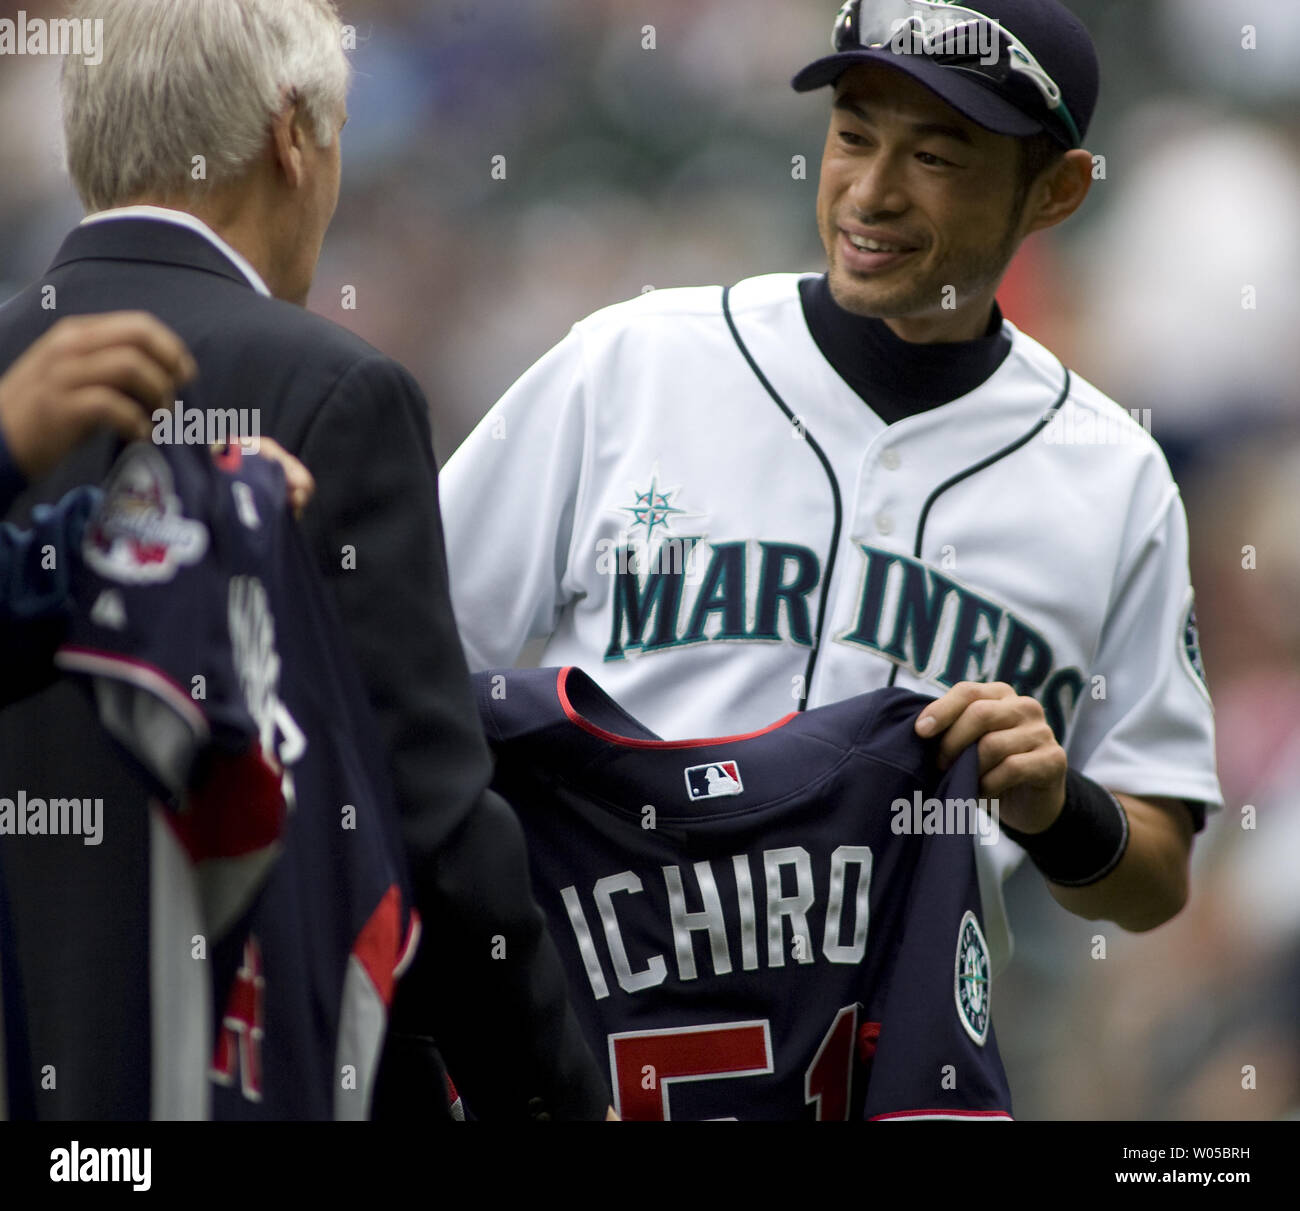 Seattle Mariners' Ichiro Suzuki is presented his All Star Jersey before the  taking the field against theTexas Rangers at SAFECO Field in Seattle on  July 12, 2009. The Mariners beat the Rangers